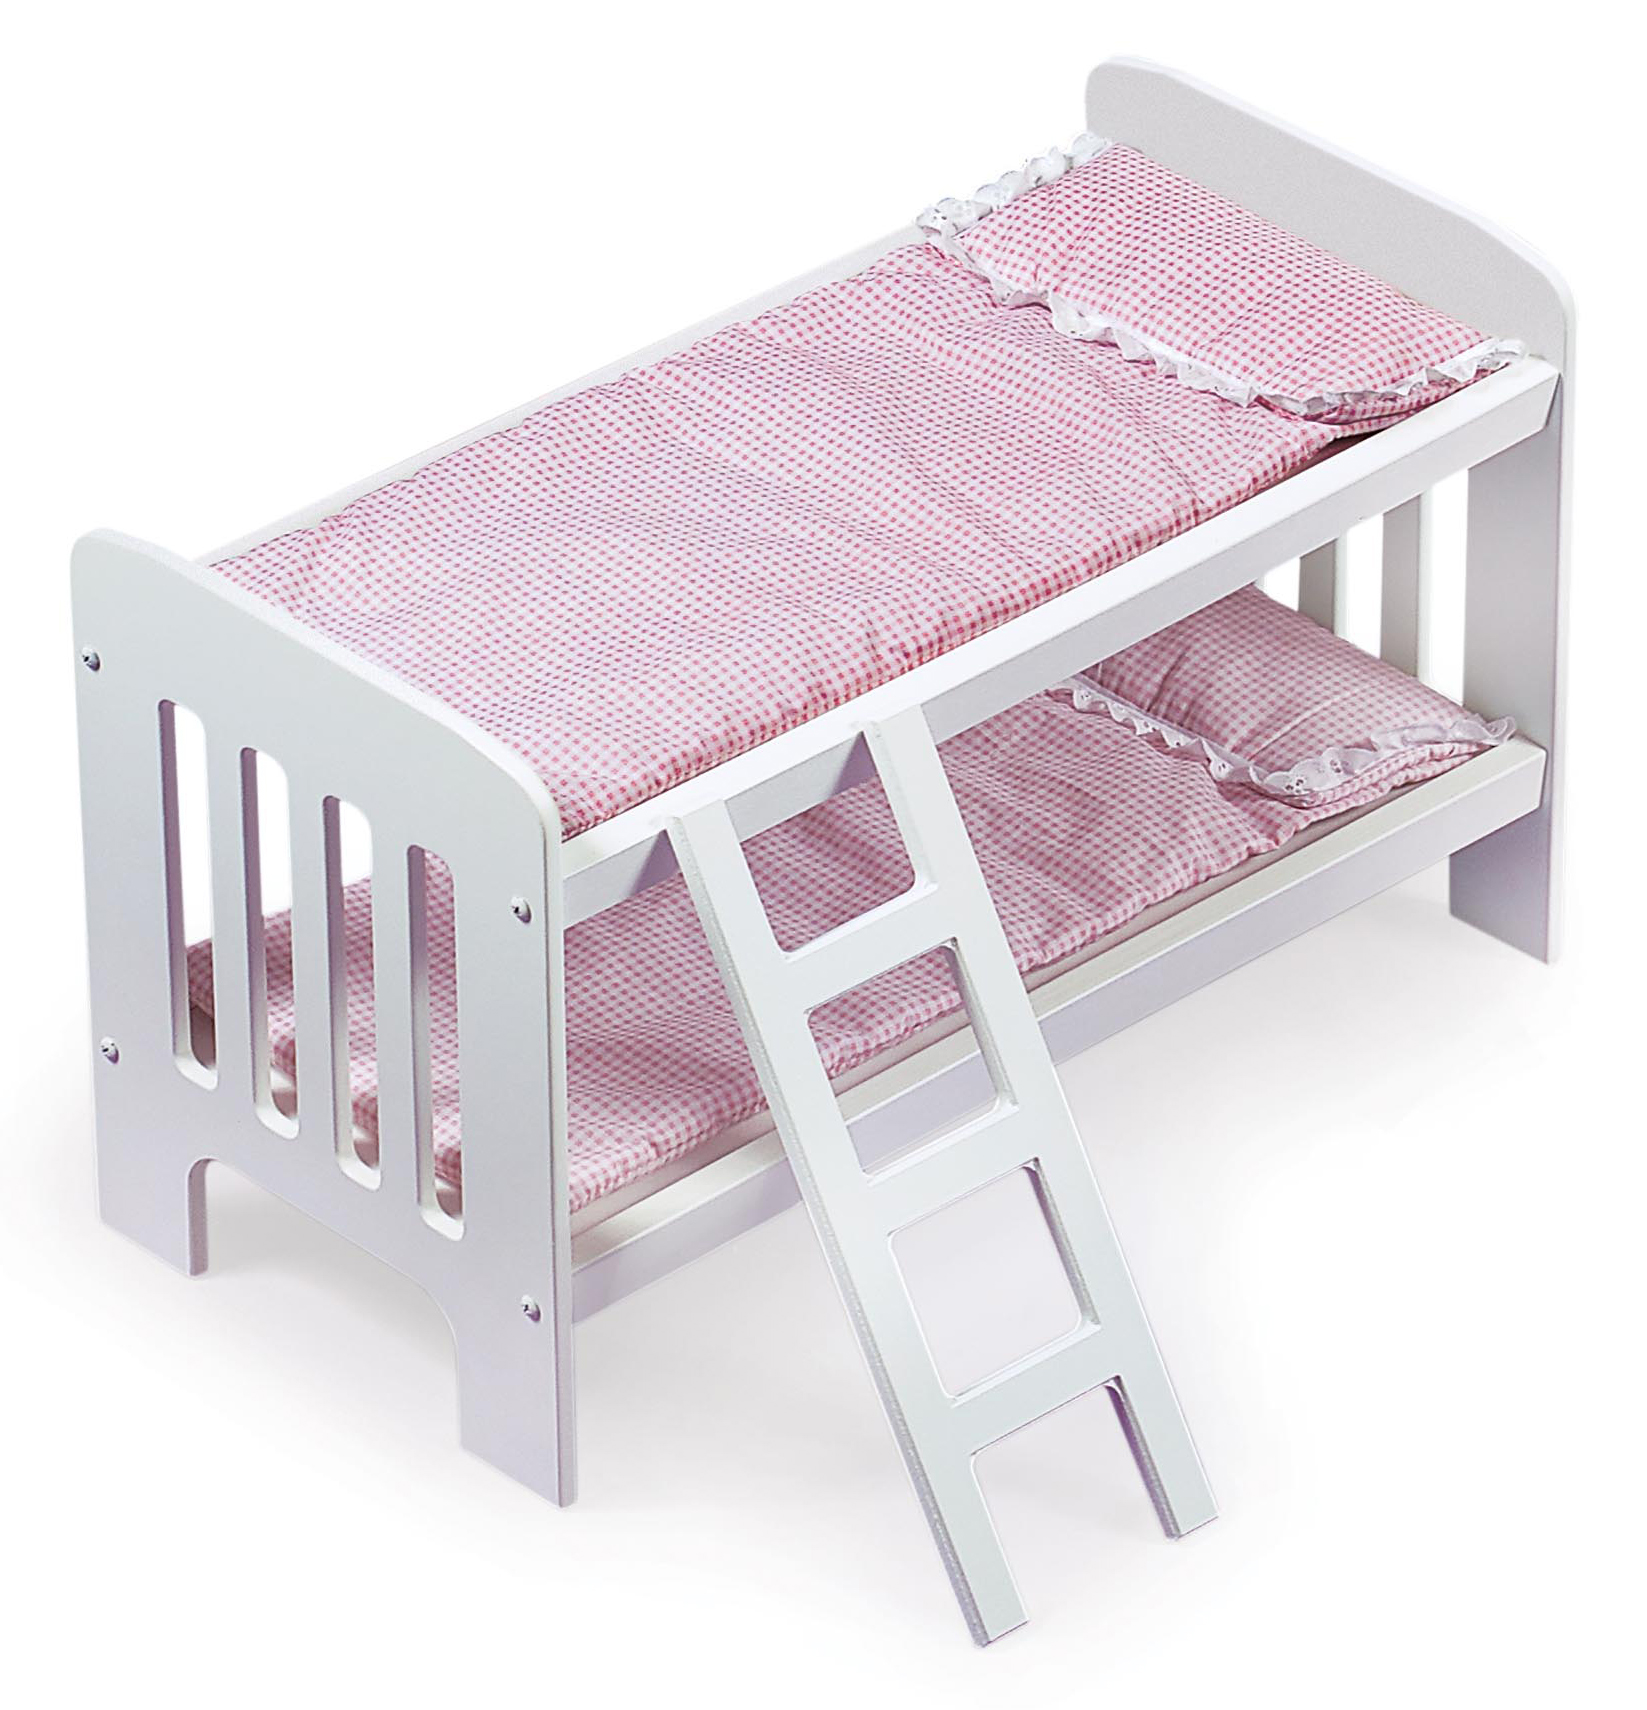 Doll Bunk Bed with Bedding, Ladder, and Free Personalization Kit - White/Pink/Gingham